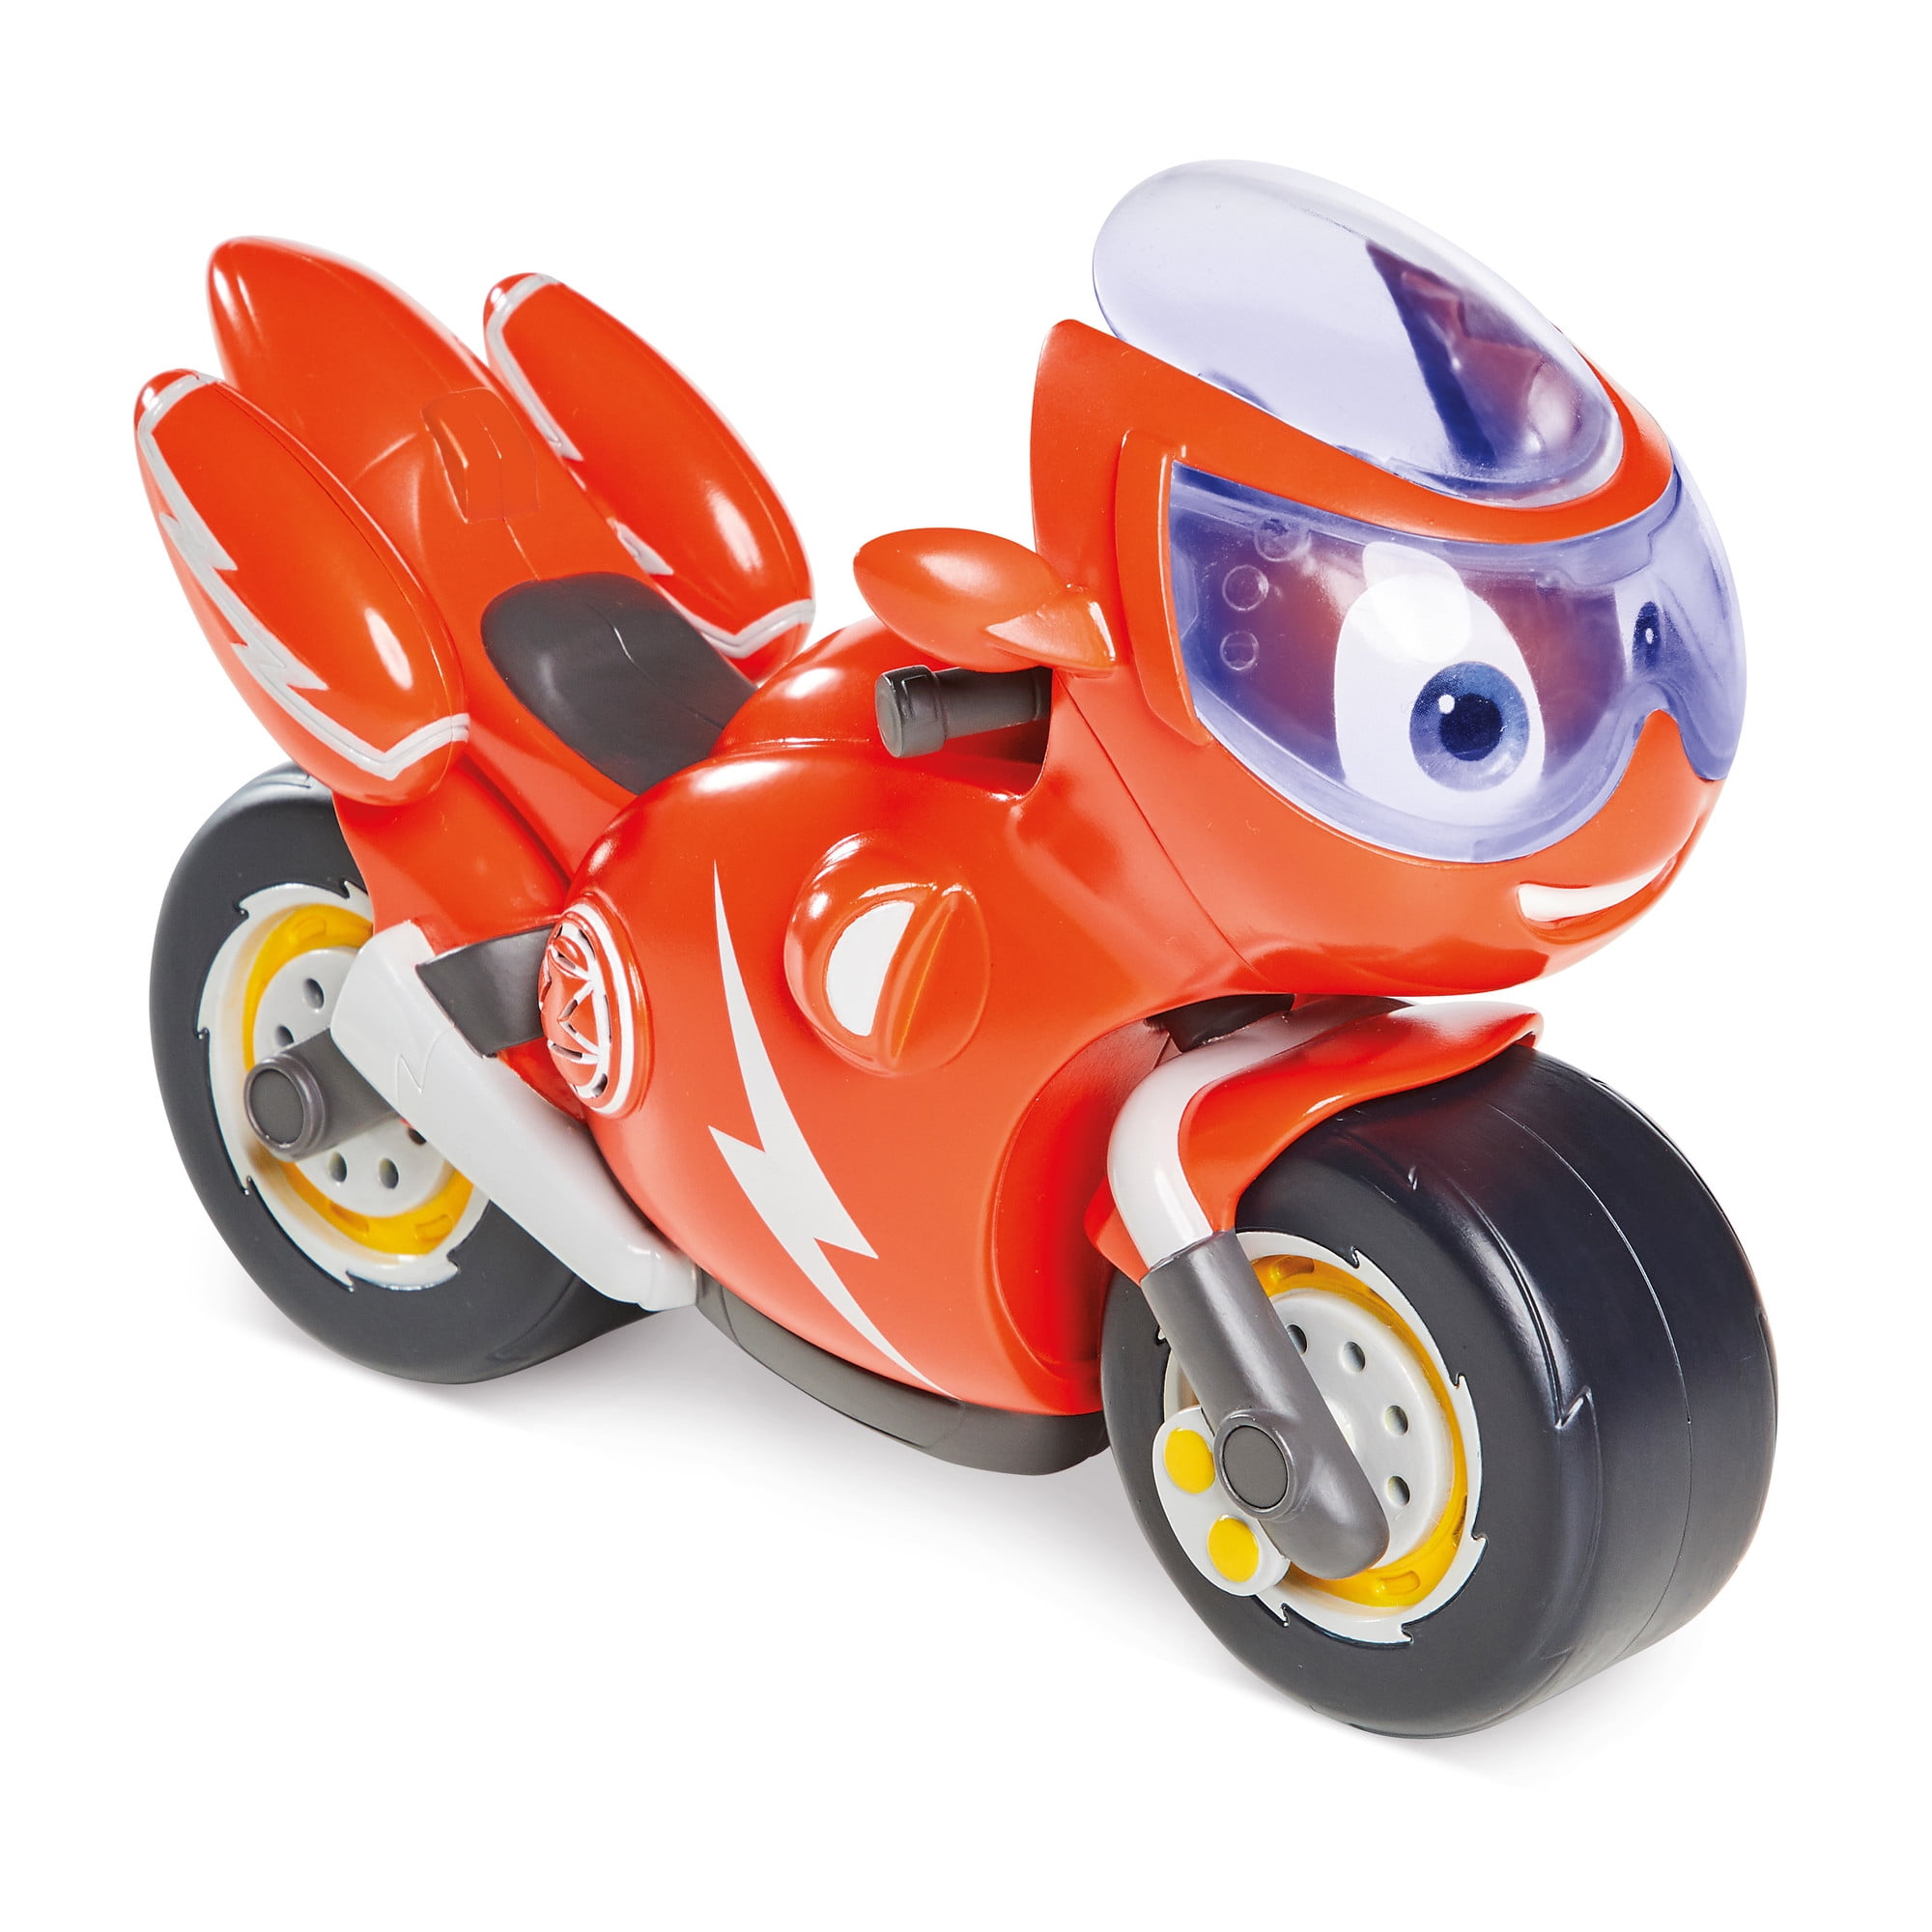 MOTORCYCLE TOY WITH LIGHTS SOUND AND DRIVER TOY BATTERY OPERATED NEW IN A BOX 